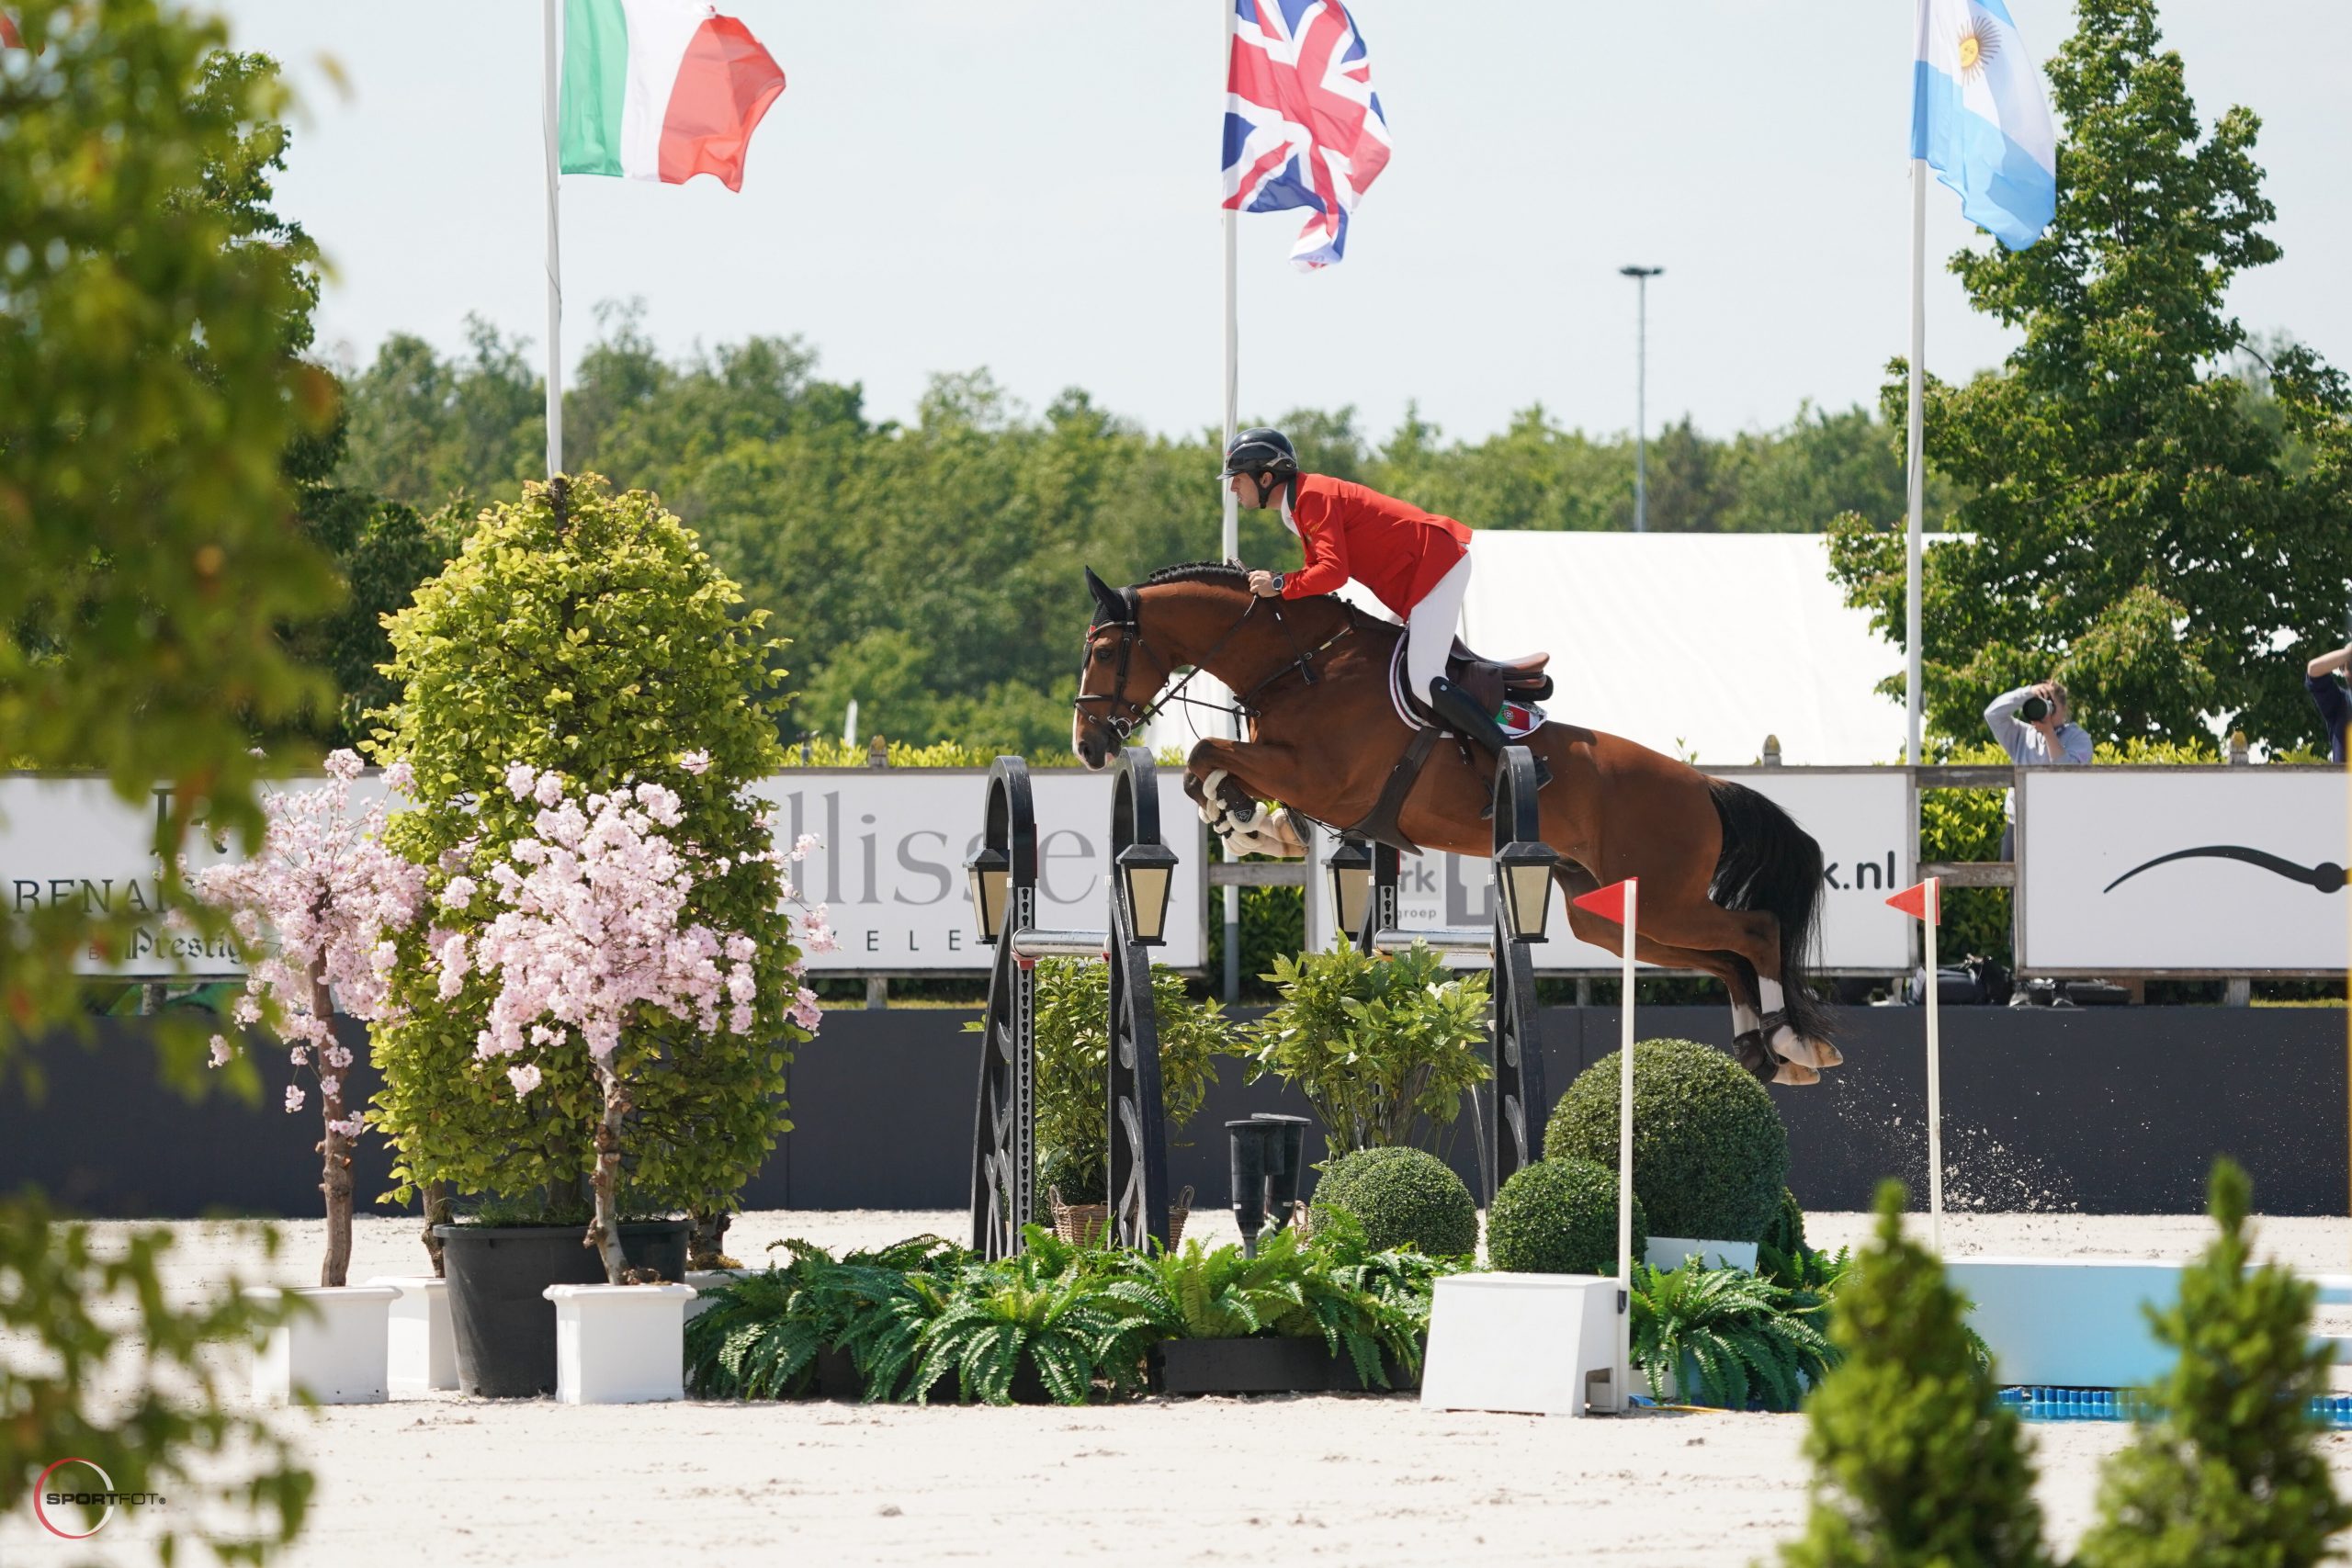 Jordan Molga M in the CSIO3* Nations Cup in Peelbergen to help team Portugal qualifying to the semi final in Deauville!